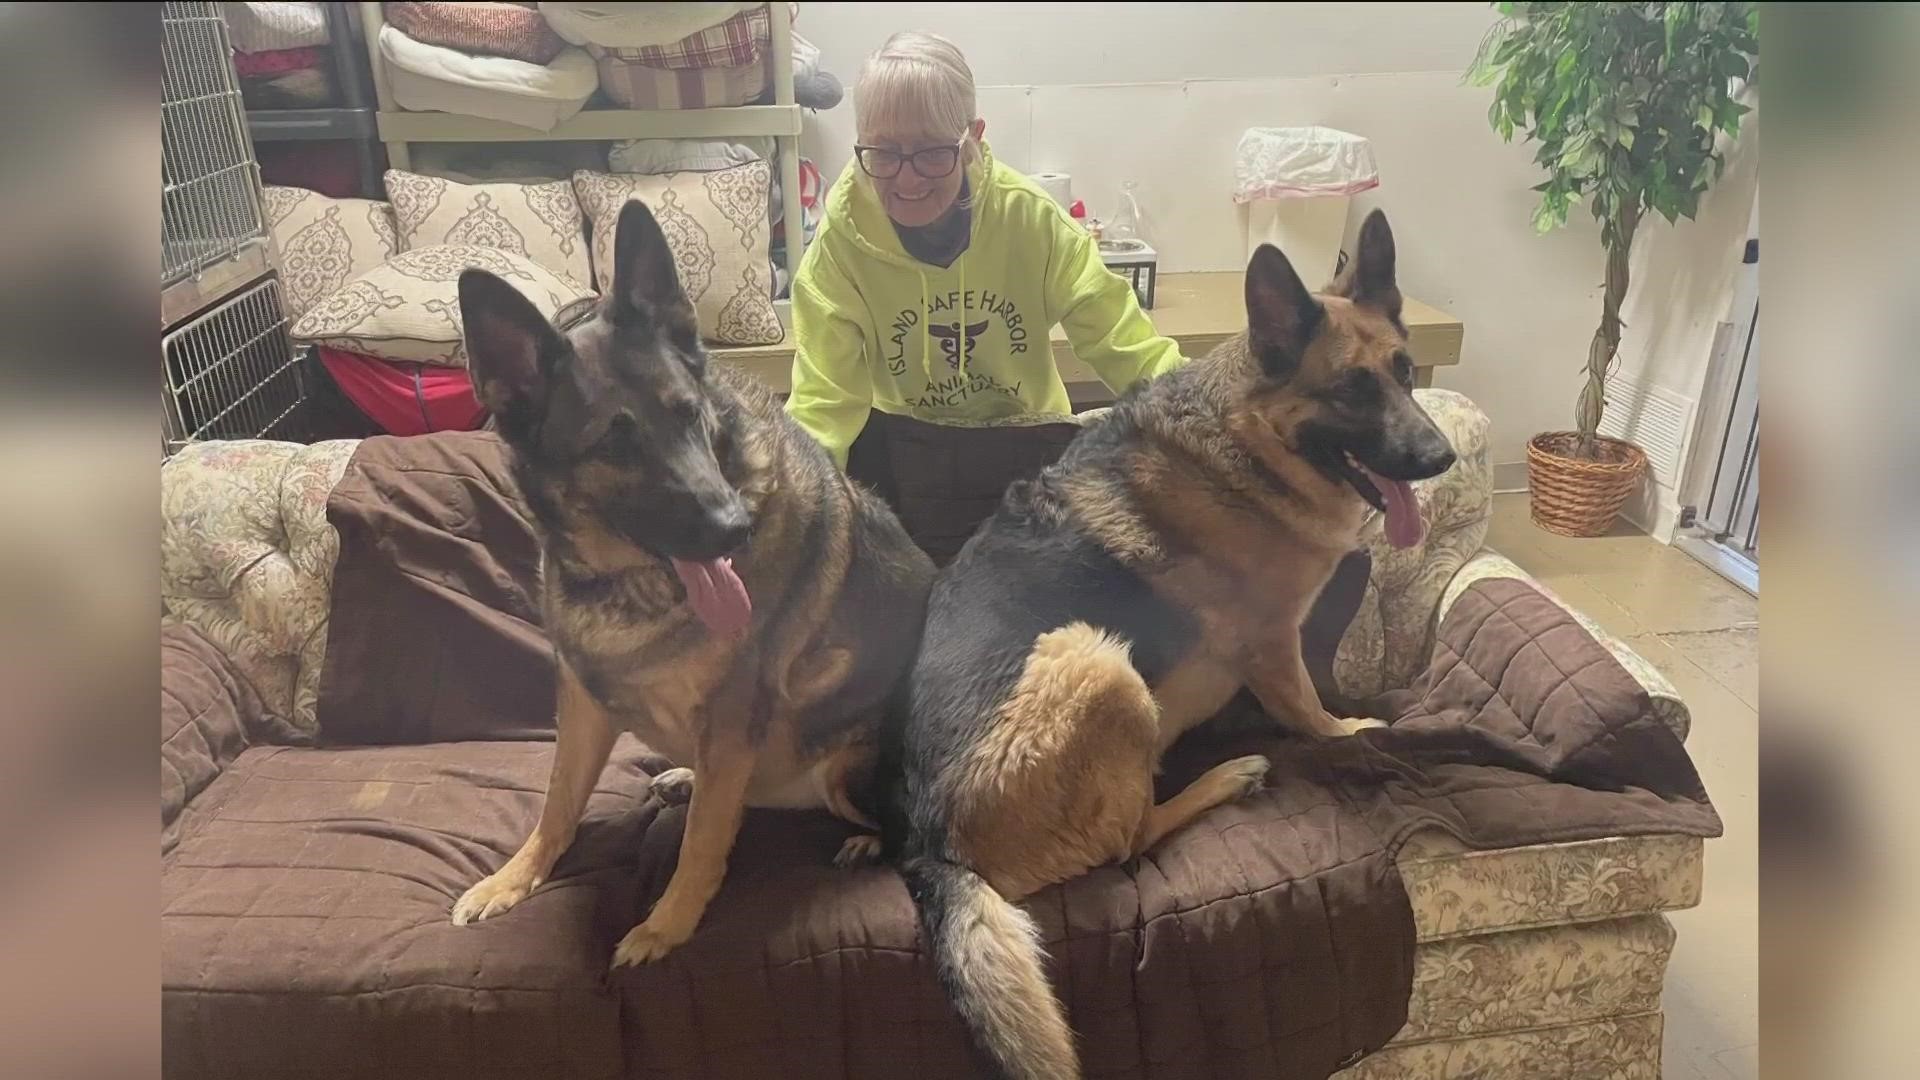 The owner of the Tiffin dogs died at 90. Now, the 5-year-old brothers are waiting to find a new owner in a Port Clinton sanctuary.